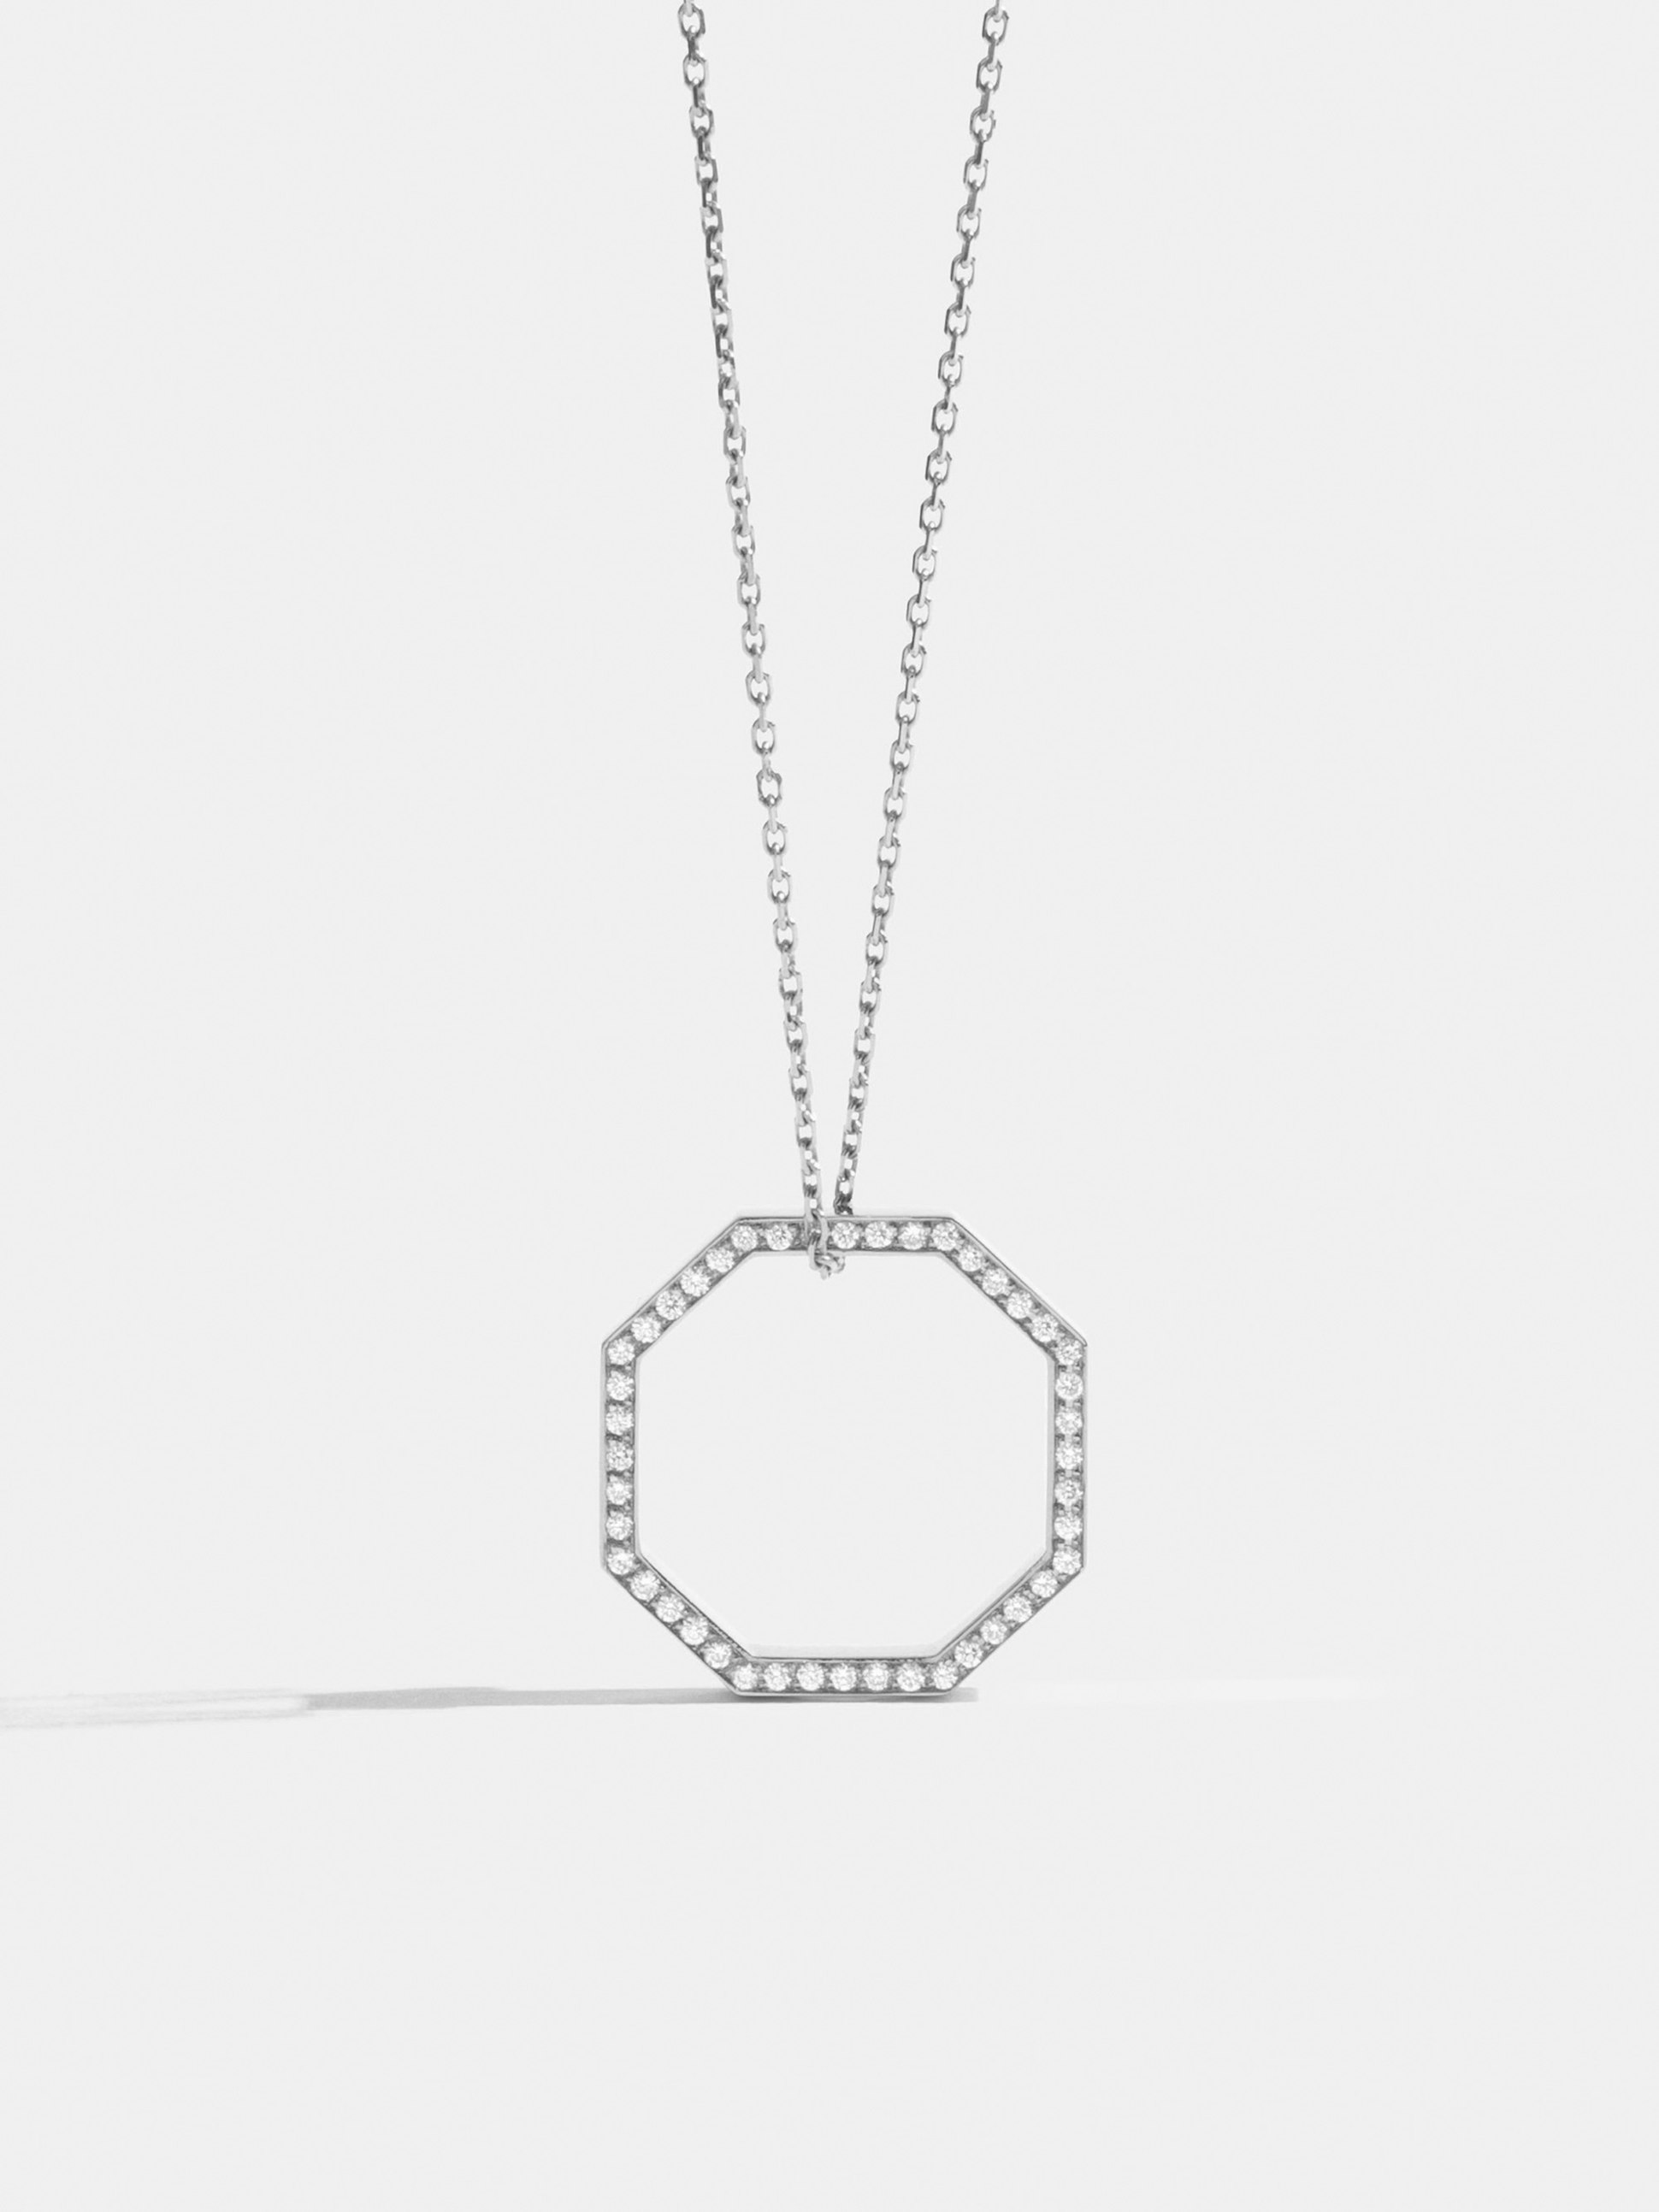 Octogone necklace with a 18mm pendant in 18k Fairmined ethical white gold, paved with lab-grown diamonds, on a 88cm chain.